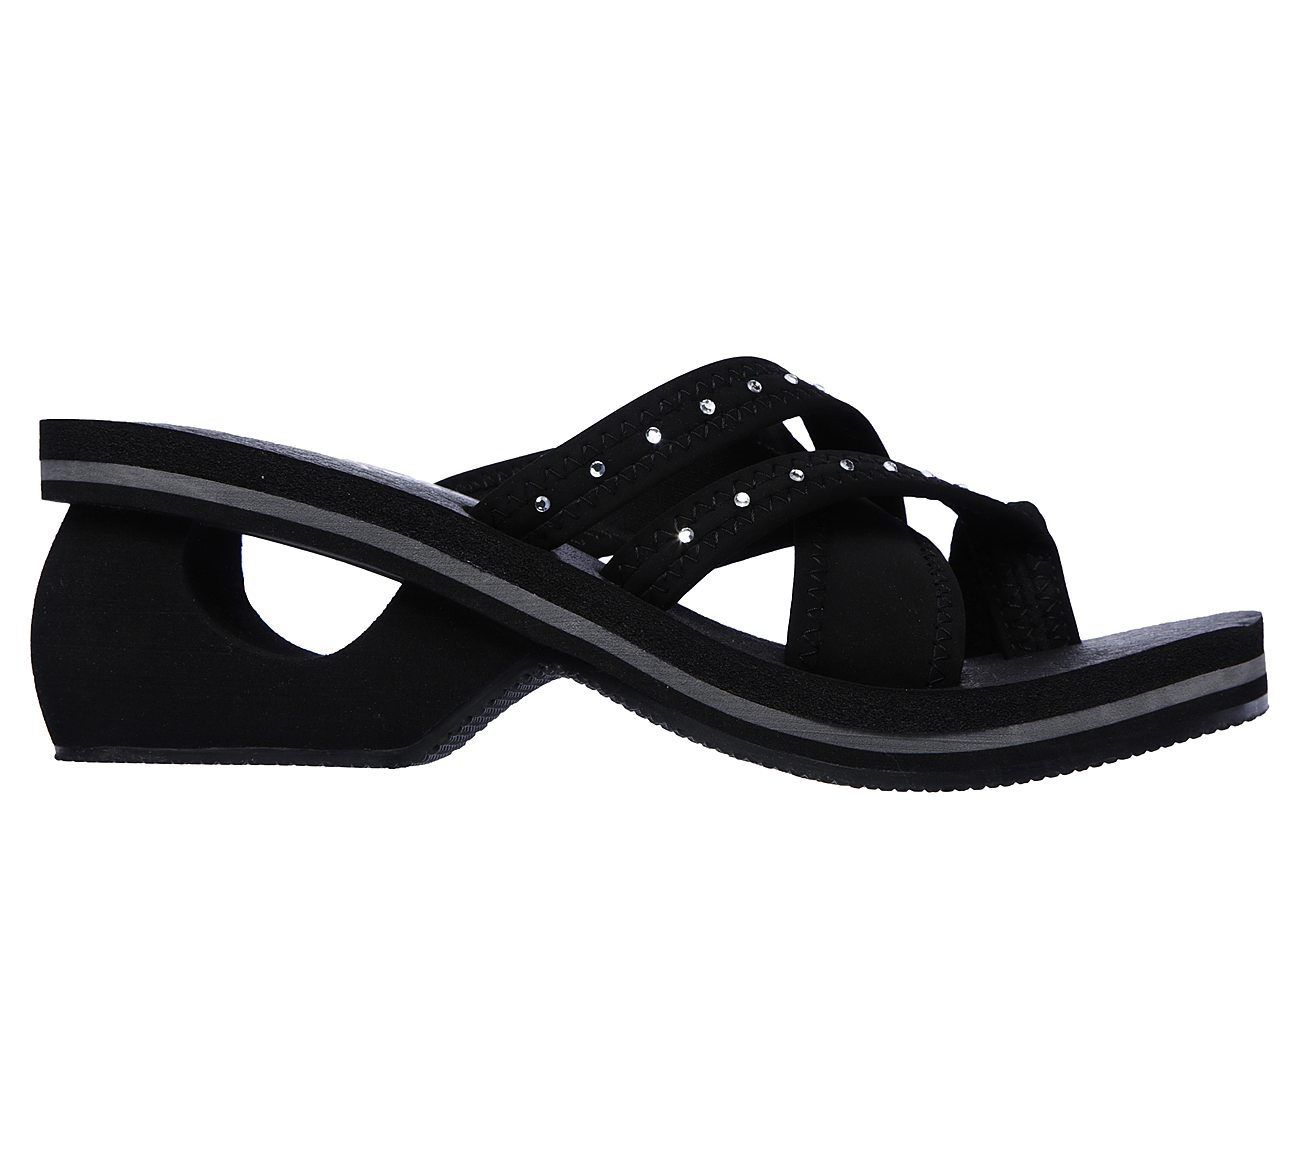 skechers cyclers sandals